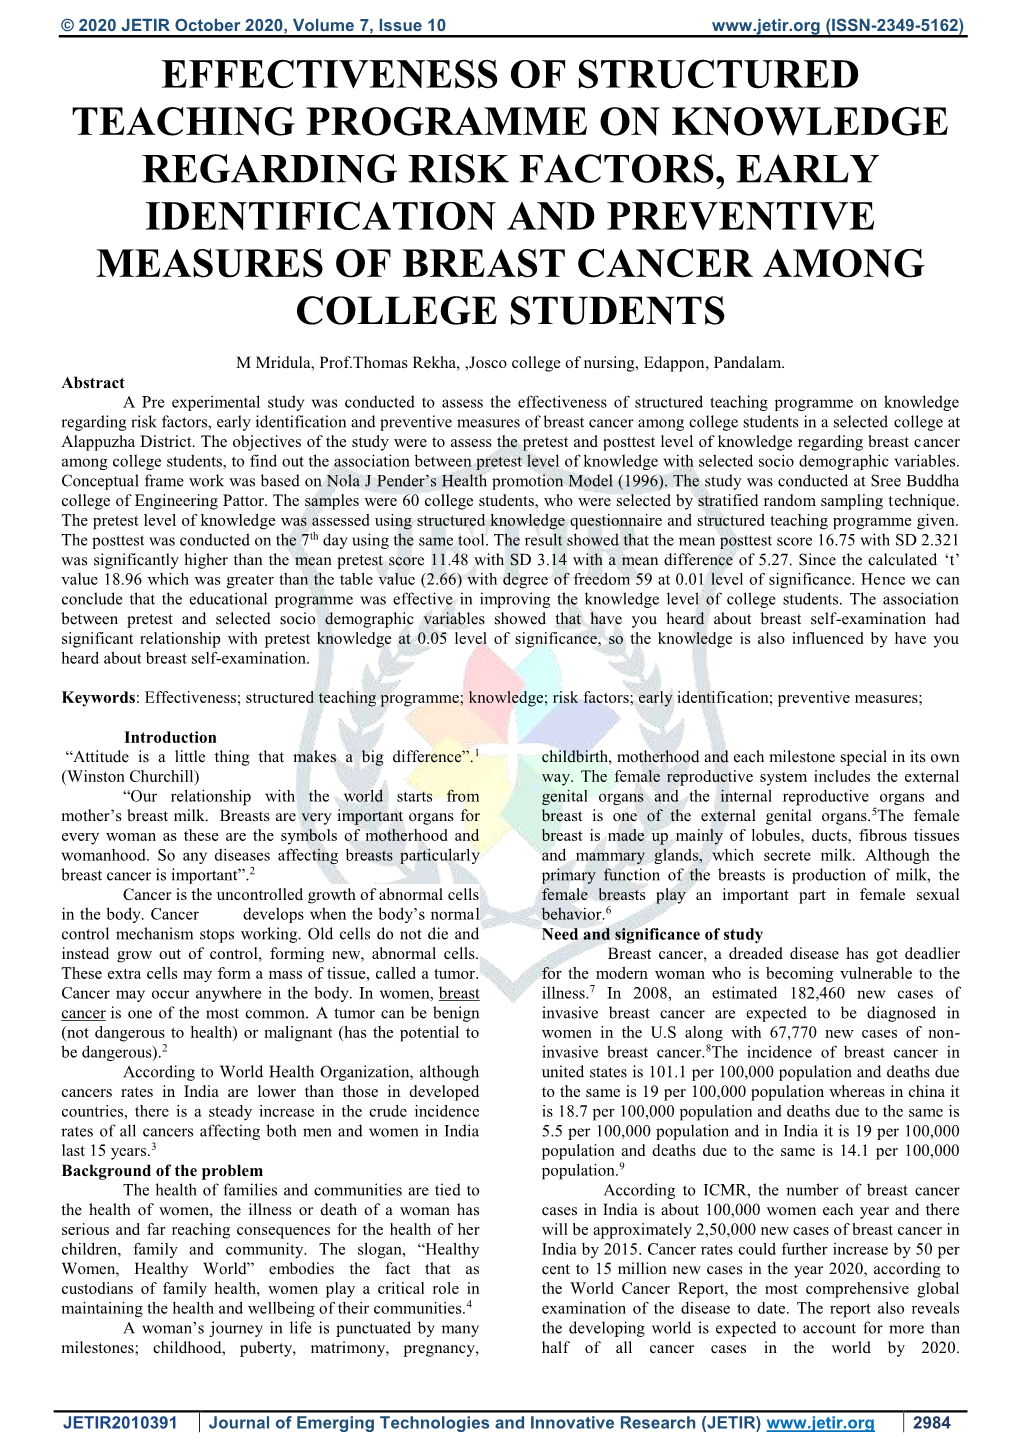 Effectiveness of Structured Teaching Programme on Knowledge Regarding Risk Factors, Early Identification and Preventive Measures of Breast Cancer Among College Students